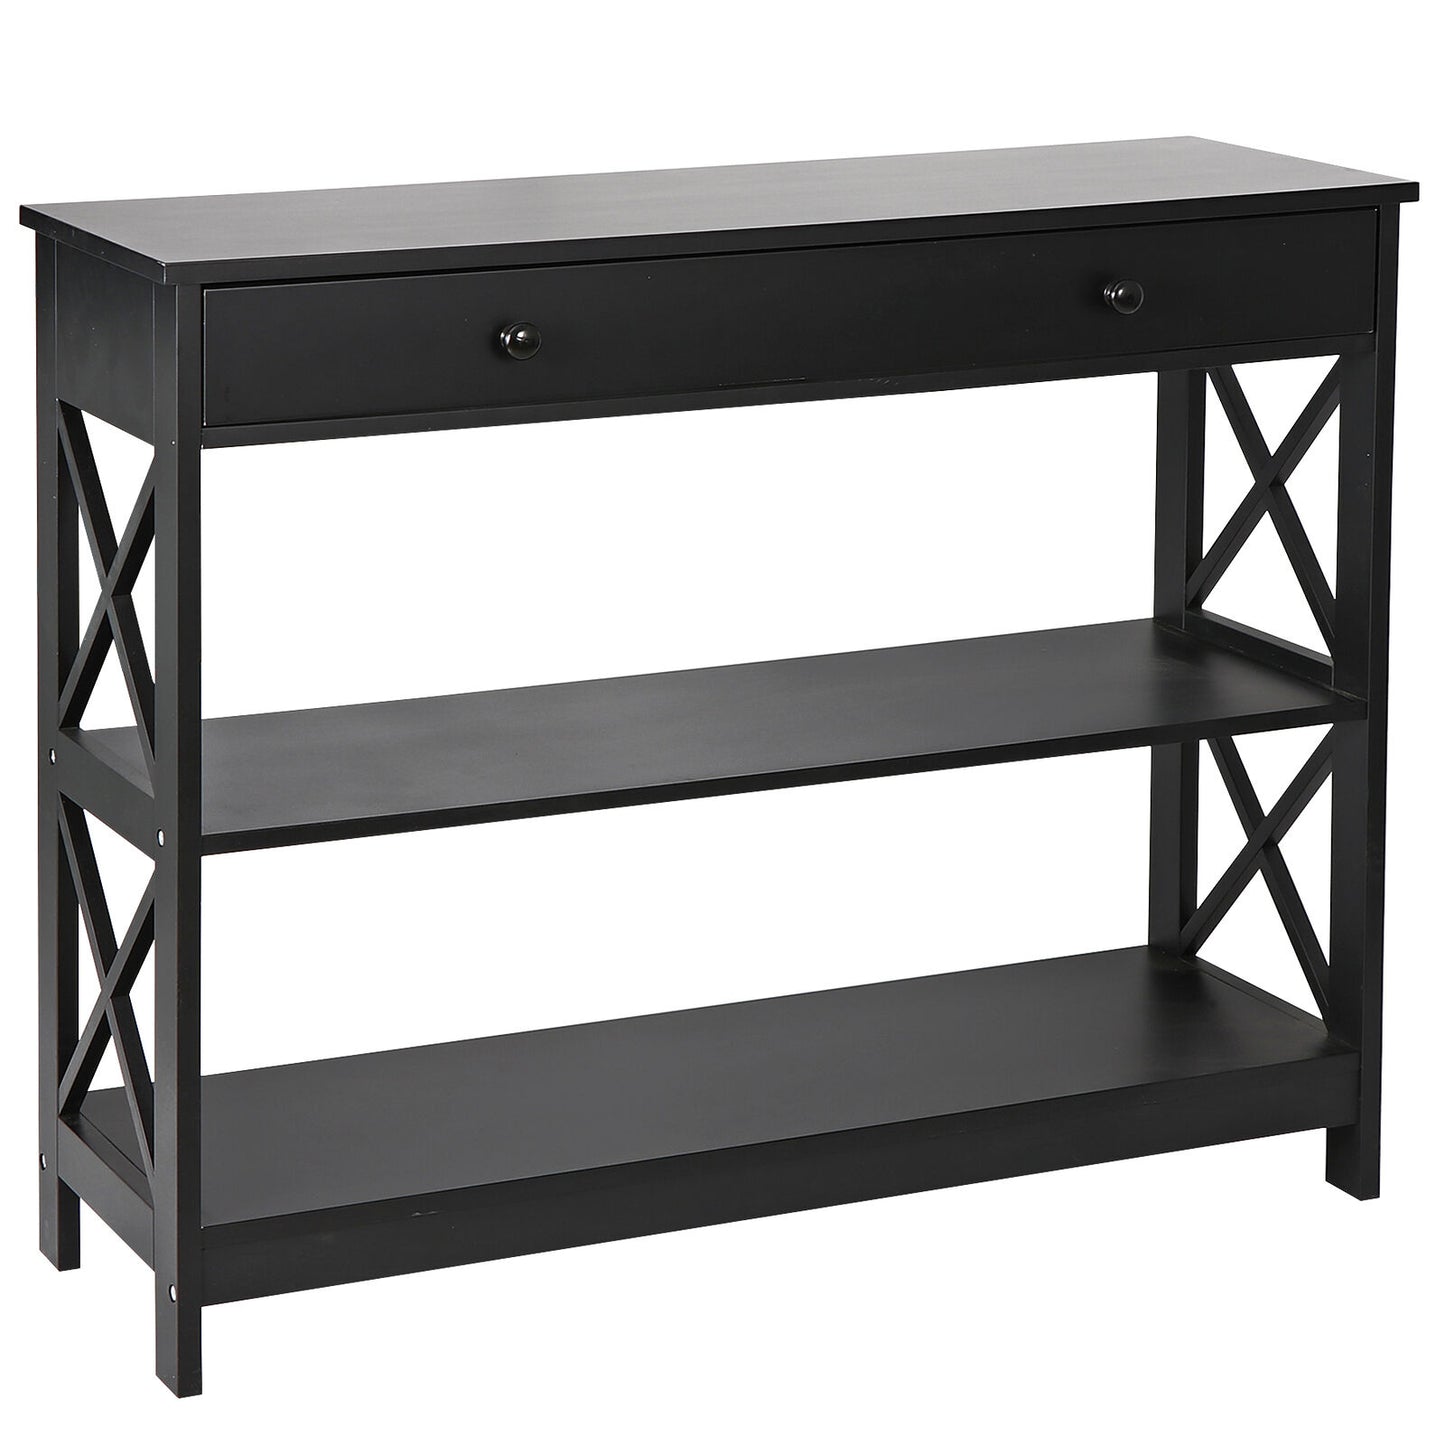 Three Tires X Shaped Multipurpose Entryway Console Table with One Drawer Black